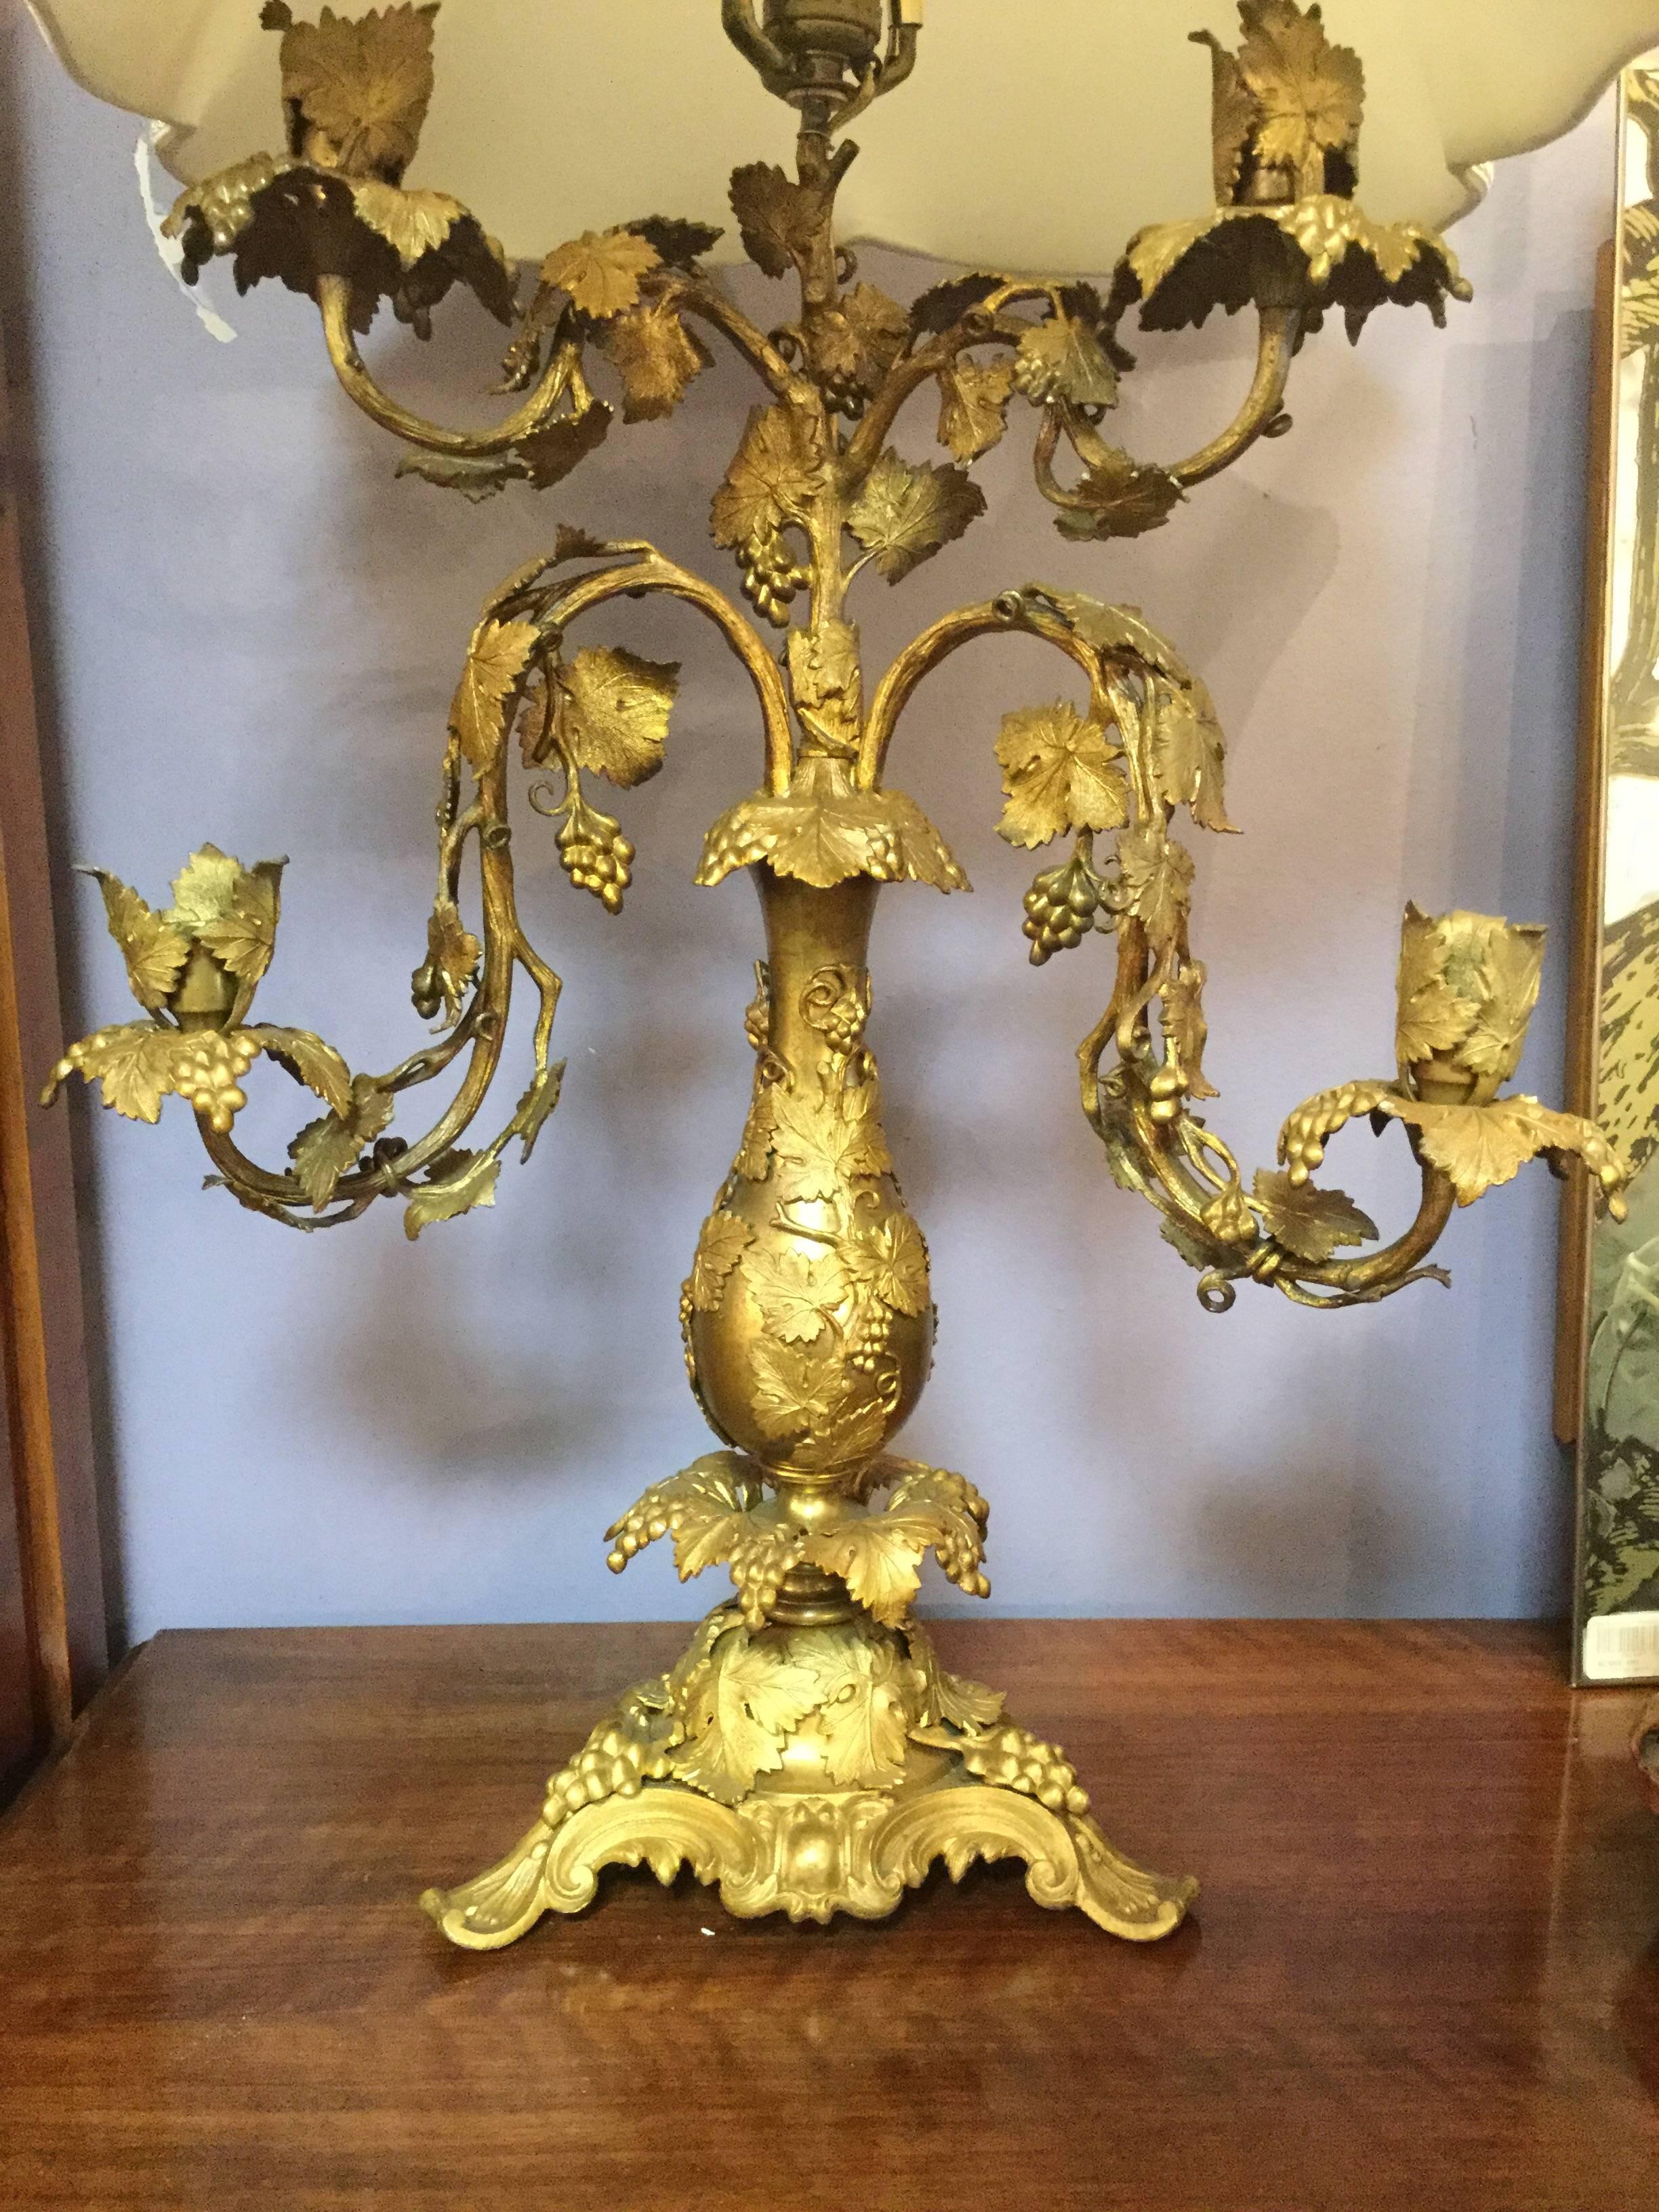 Gorgeous pair of French bronze doré lamps. circa 1900-1920, these lamps
feature gilt bronze grape clusters and leaves over richly wrought candelabra
arms. There are 4 arms on each lamp with bobeches that can hold candelabra
electric bulbs of 25